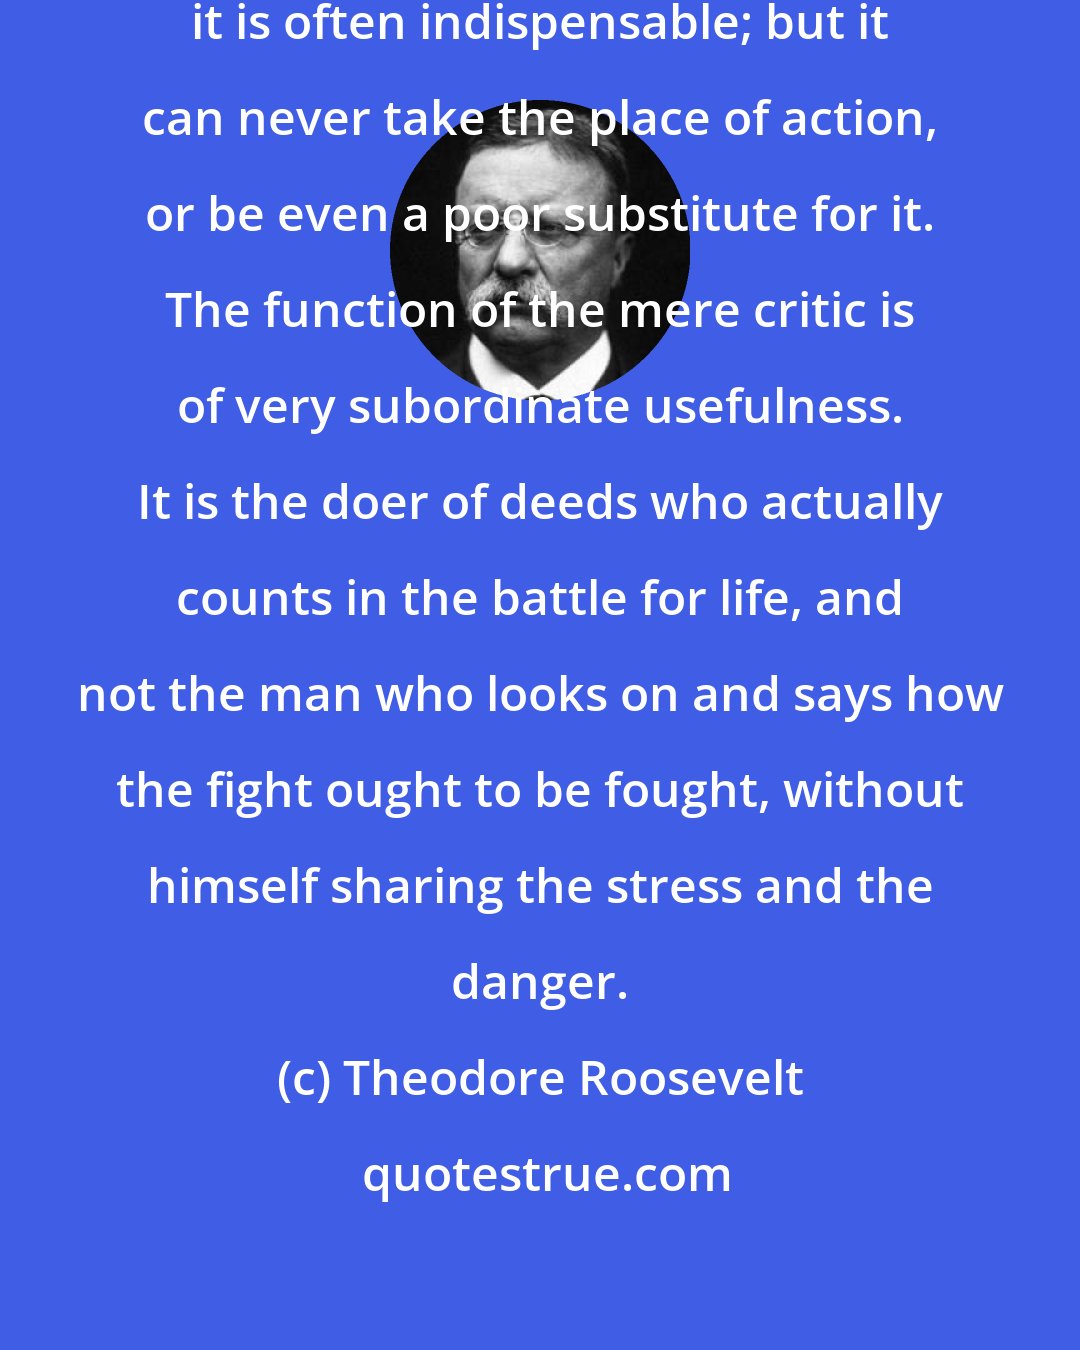 Theodore Roosevelt: Criticism is necessary and useful; it is often indispensable; but it can never take the place of action, or be even a poor substitute for it. The function of the mere critic is of very subordinate usefulness. It is the doer of deeds who actually counts in the battle for life, and not the man who looks on and says how the fight ought to be fought, without himself sharing the stress and the danger.